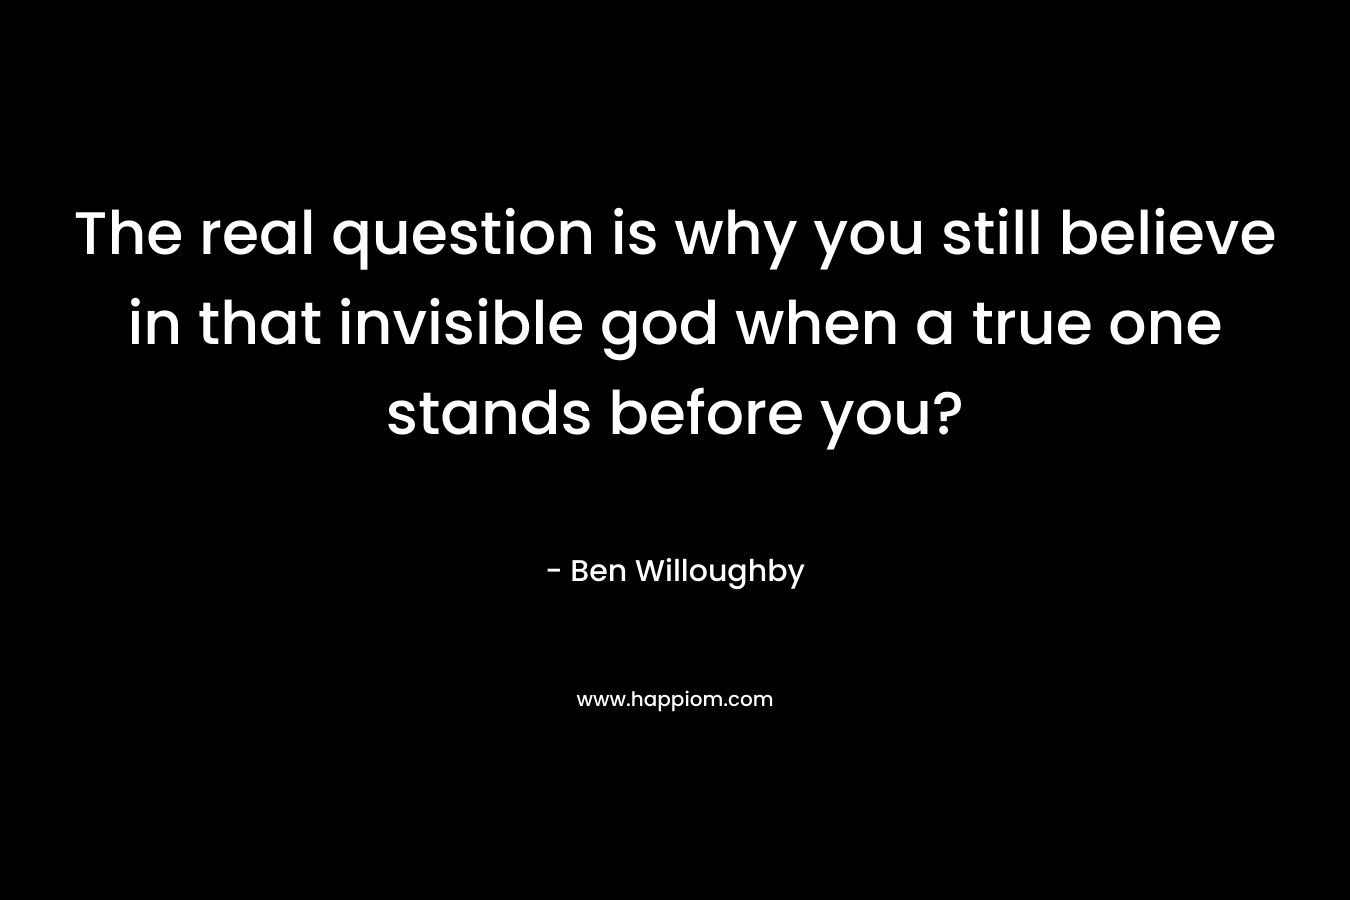 The real question is why you still believe in that invisible god when a true one stands before you? – Ben Willoughby